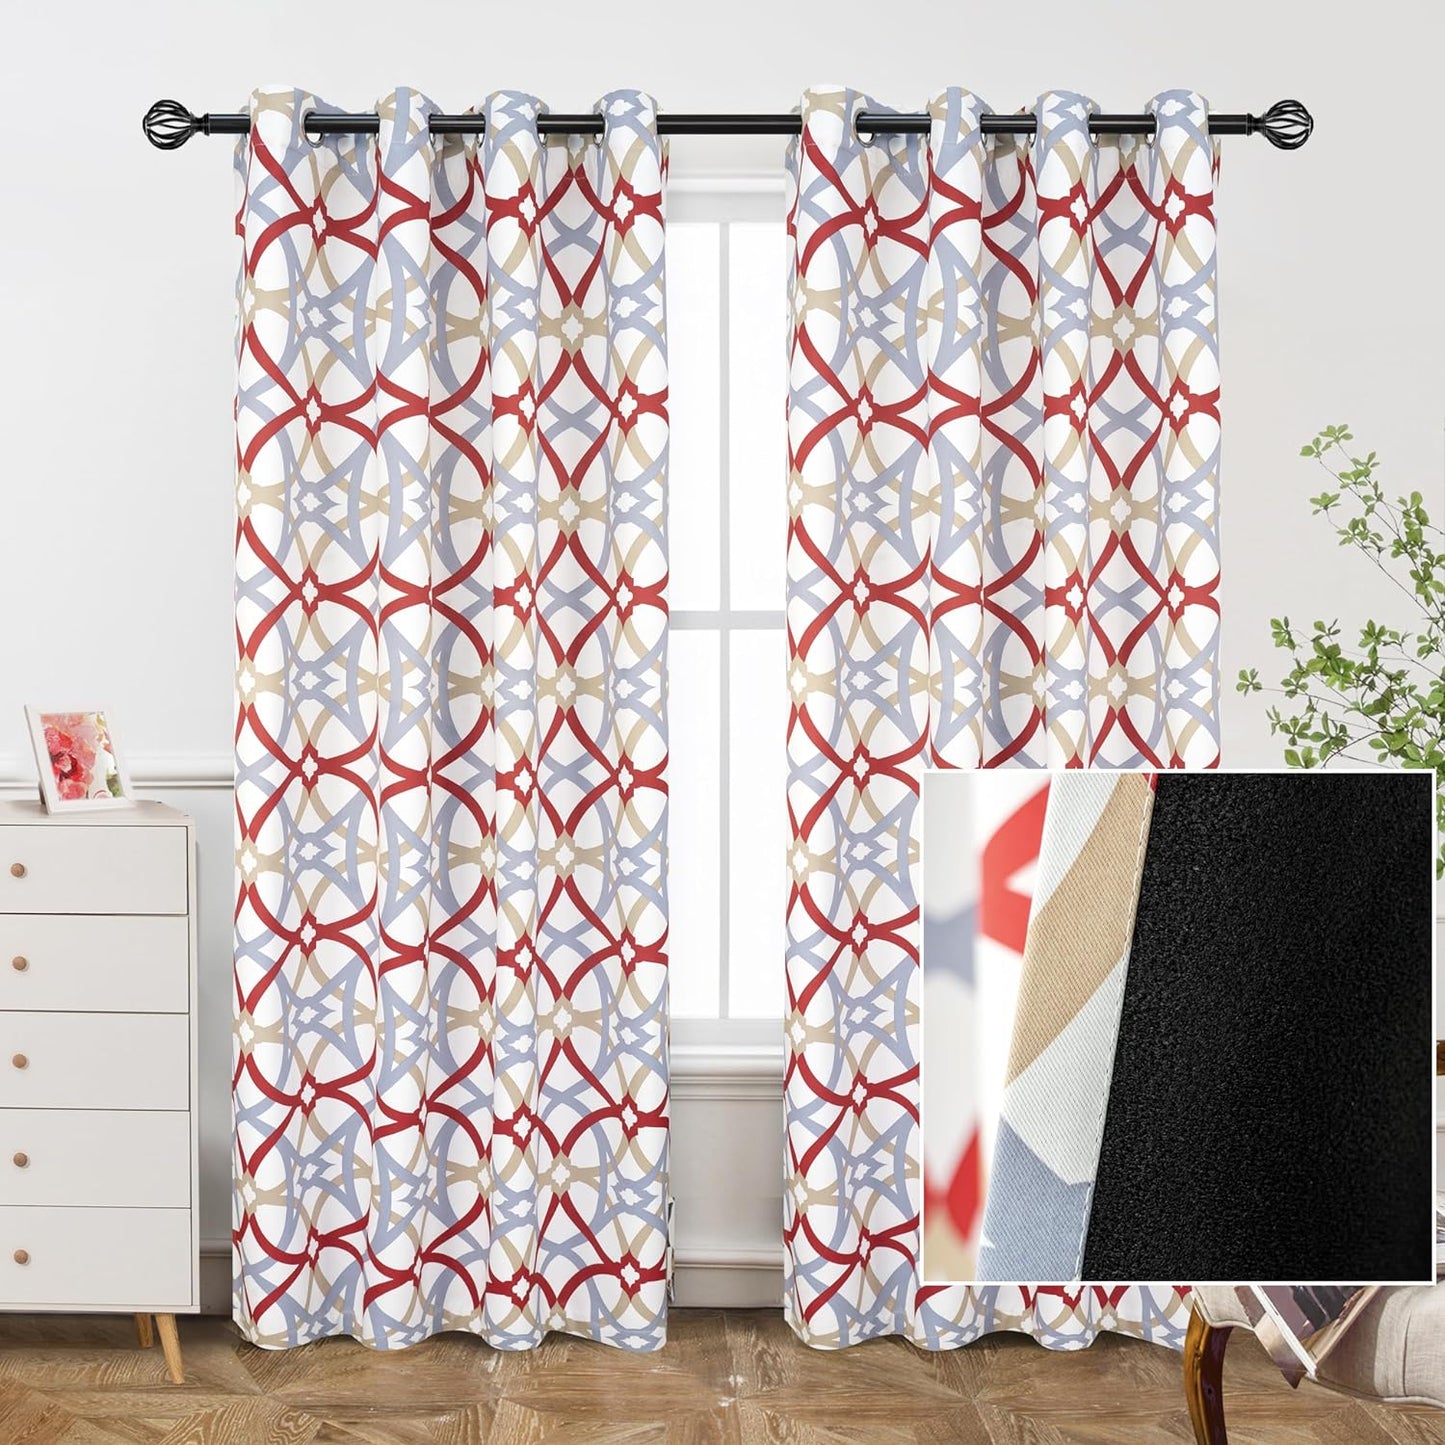 Driftaway Alexander Thermal Blackout Grommet Unlined Window Curtains Spiral Geo Trellis Pattern Set of 2 Panels Each Size 52 Inch by 84 Inch Red and Gray  DriftAway Thermal Red 52"X84" 